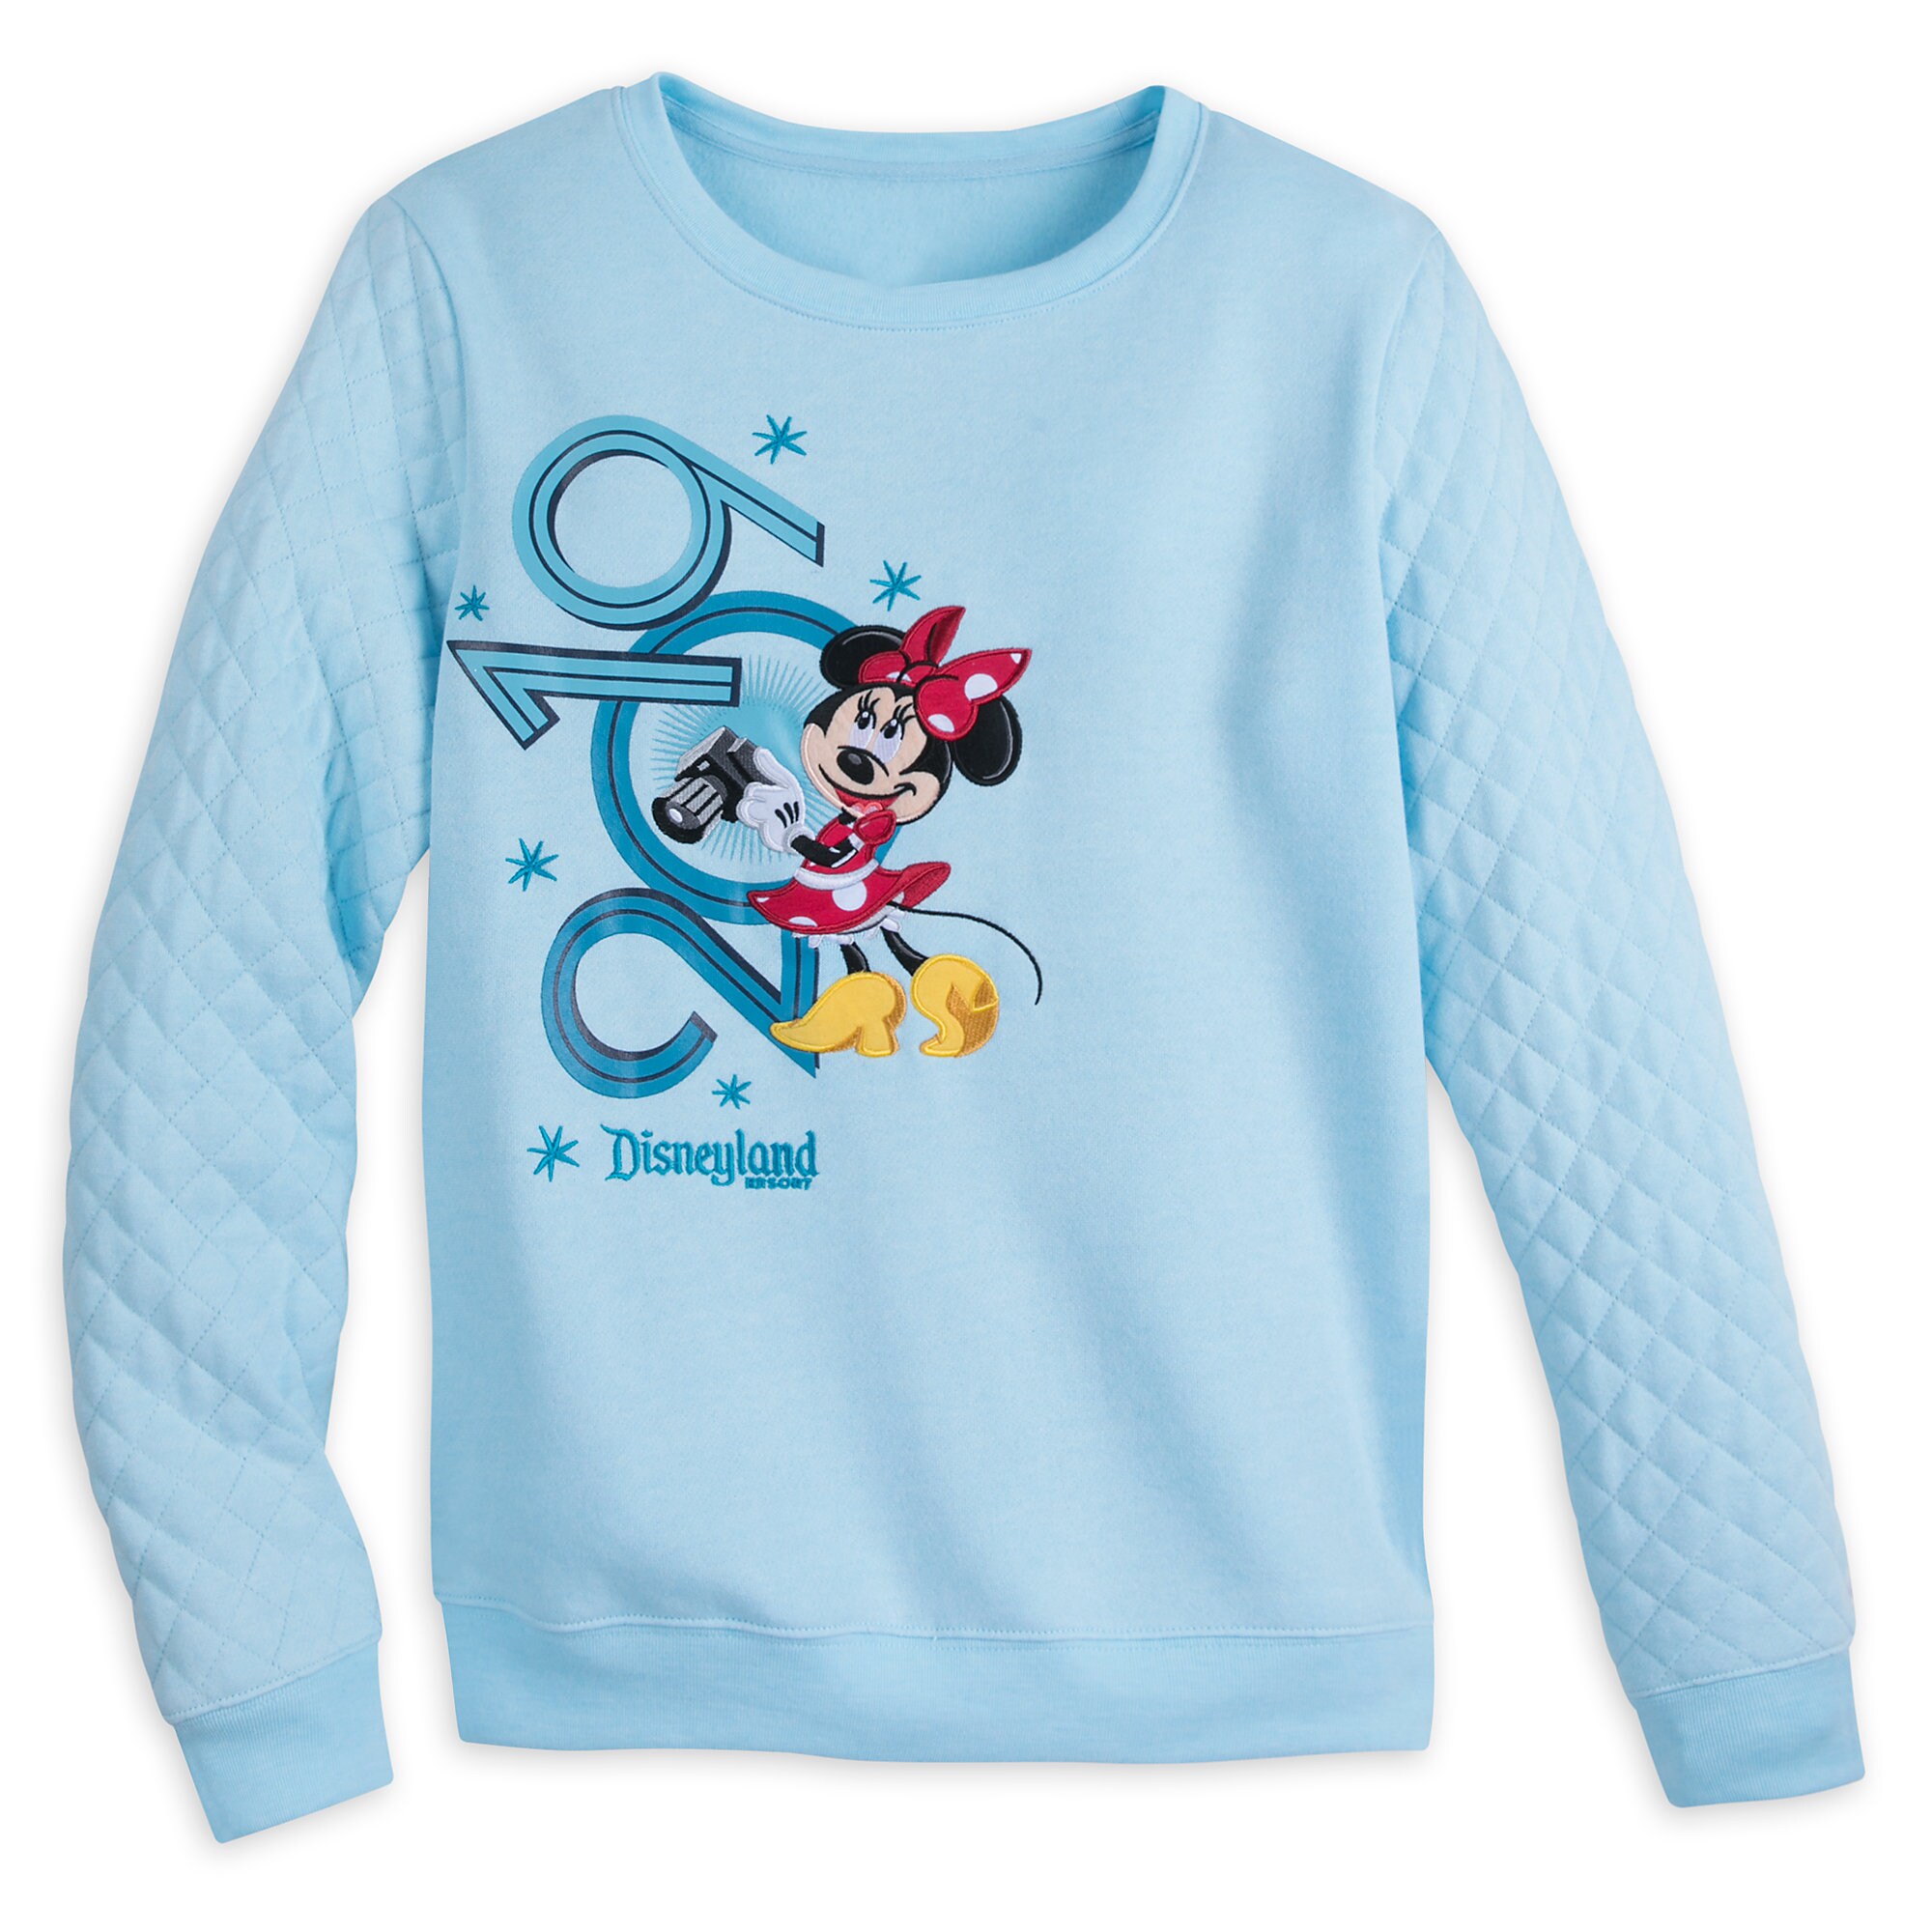 Minnie Mouse Pullover for Women - Disneyland 2019